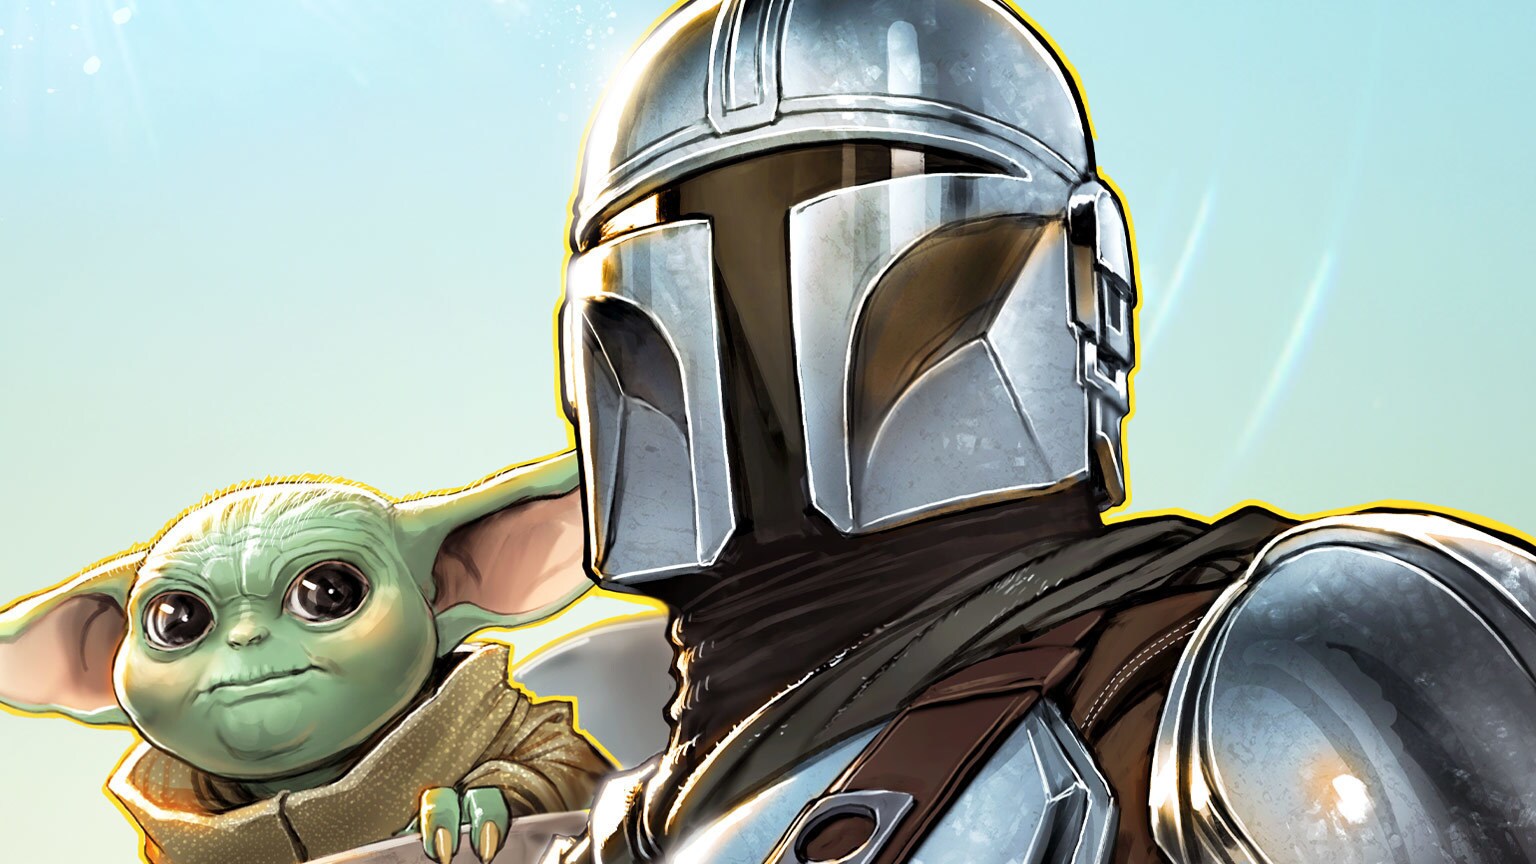 Mando and Grogu Return to Marvel Comics in New Star Wars: The